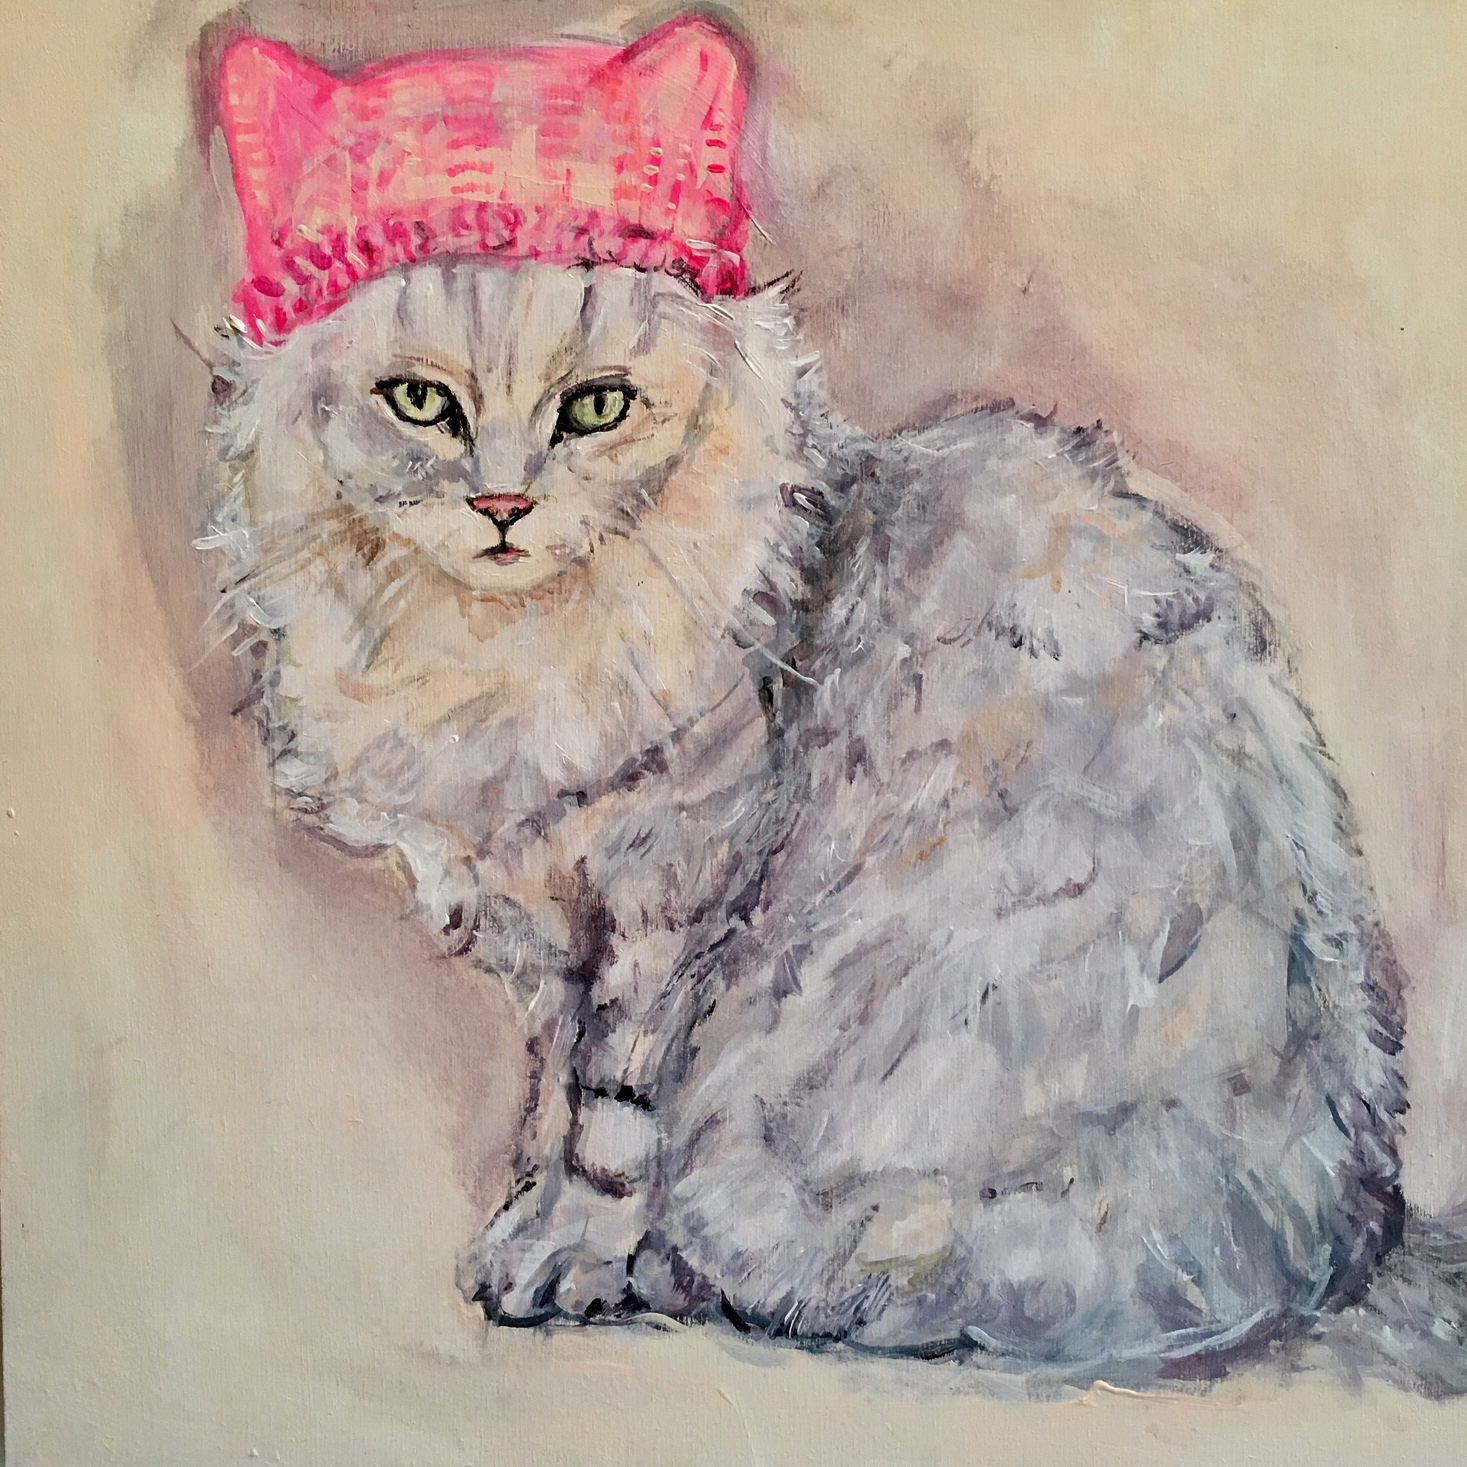  12 x 12 inch painting of a fluffy grey cat wearing a pink pussy hat: Acrylic on wood  SOLD 